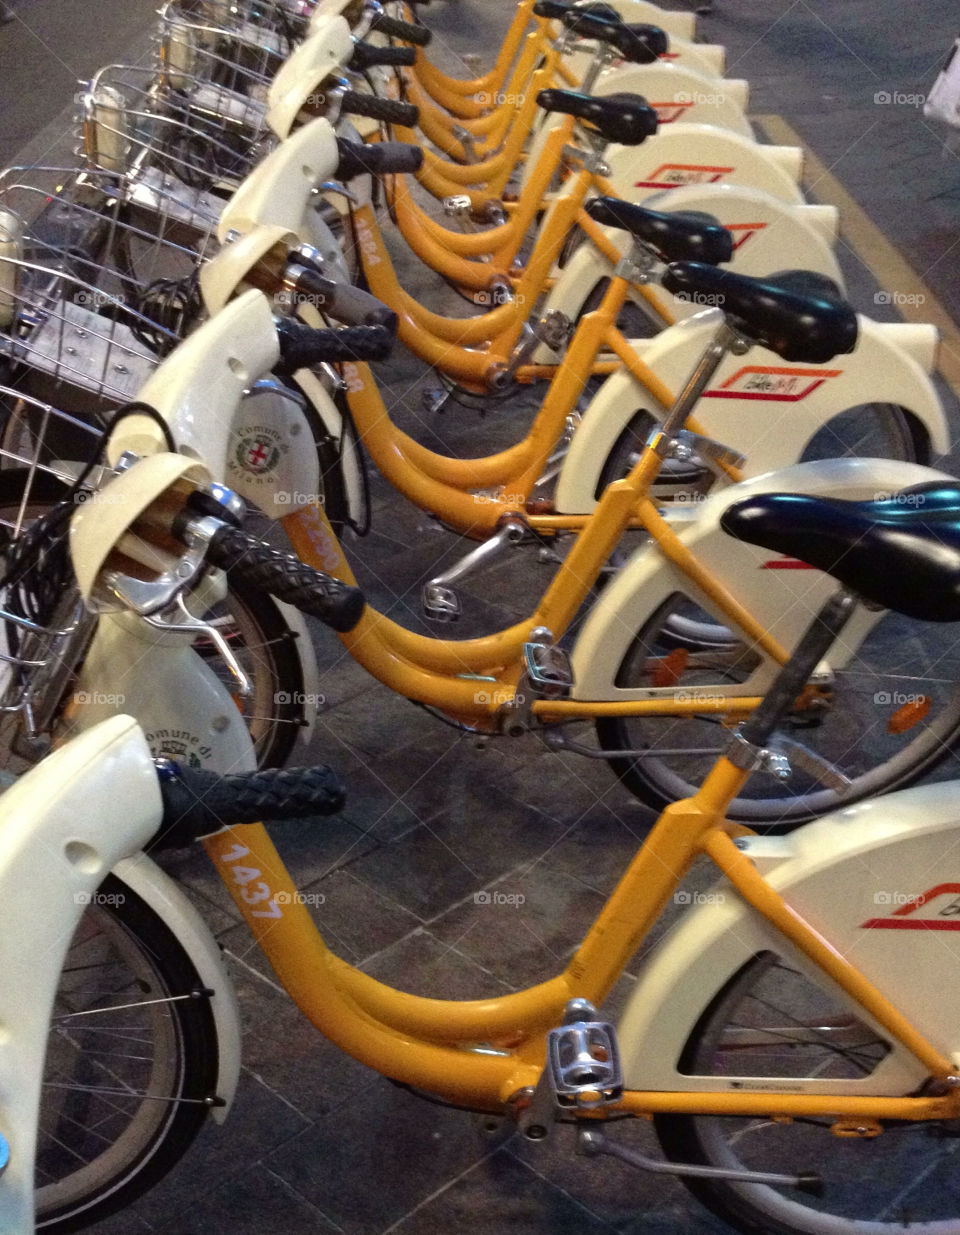 bicycles bikes order bike sharing by ollicres